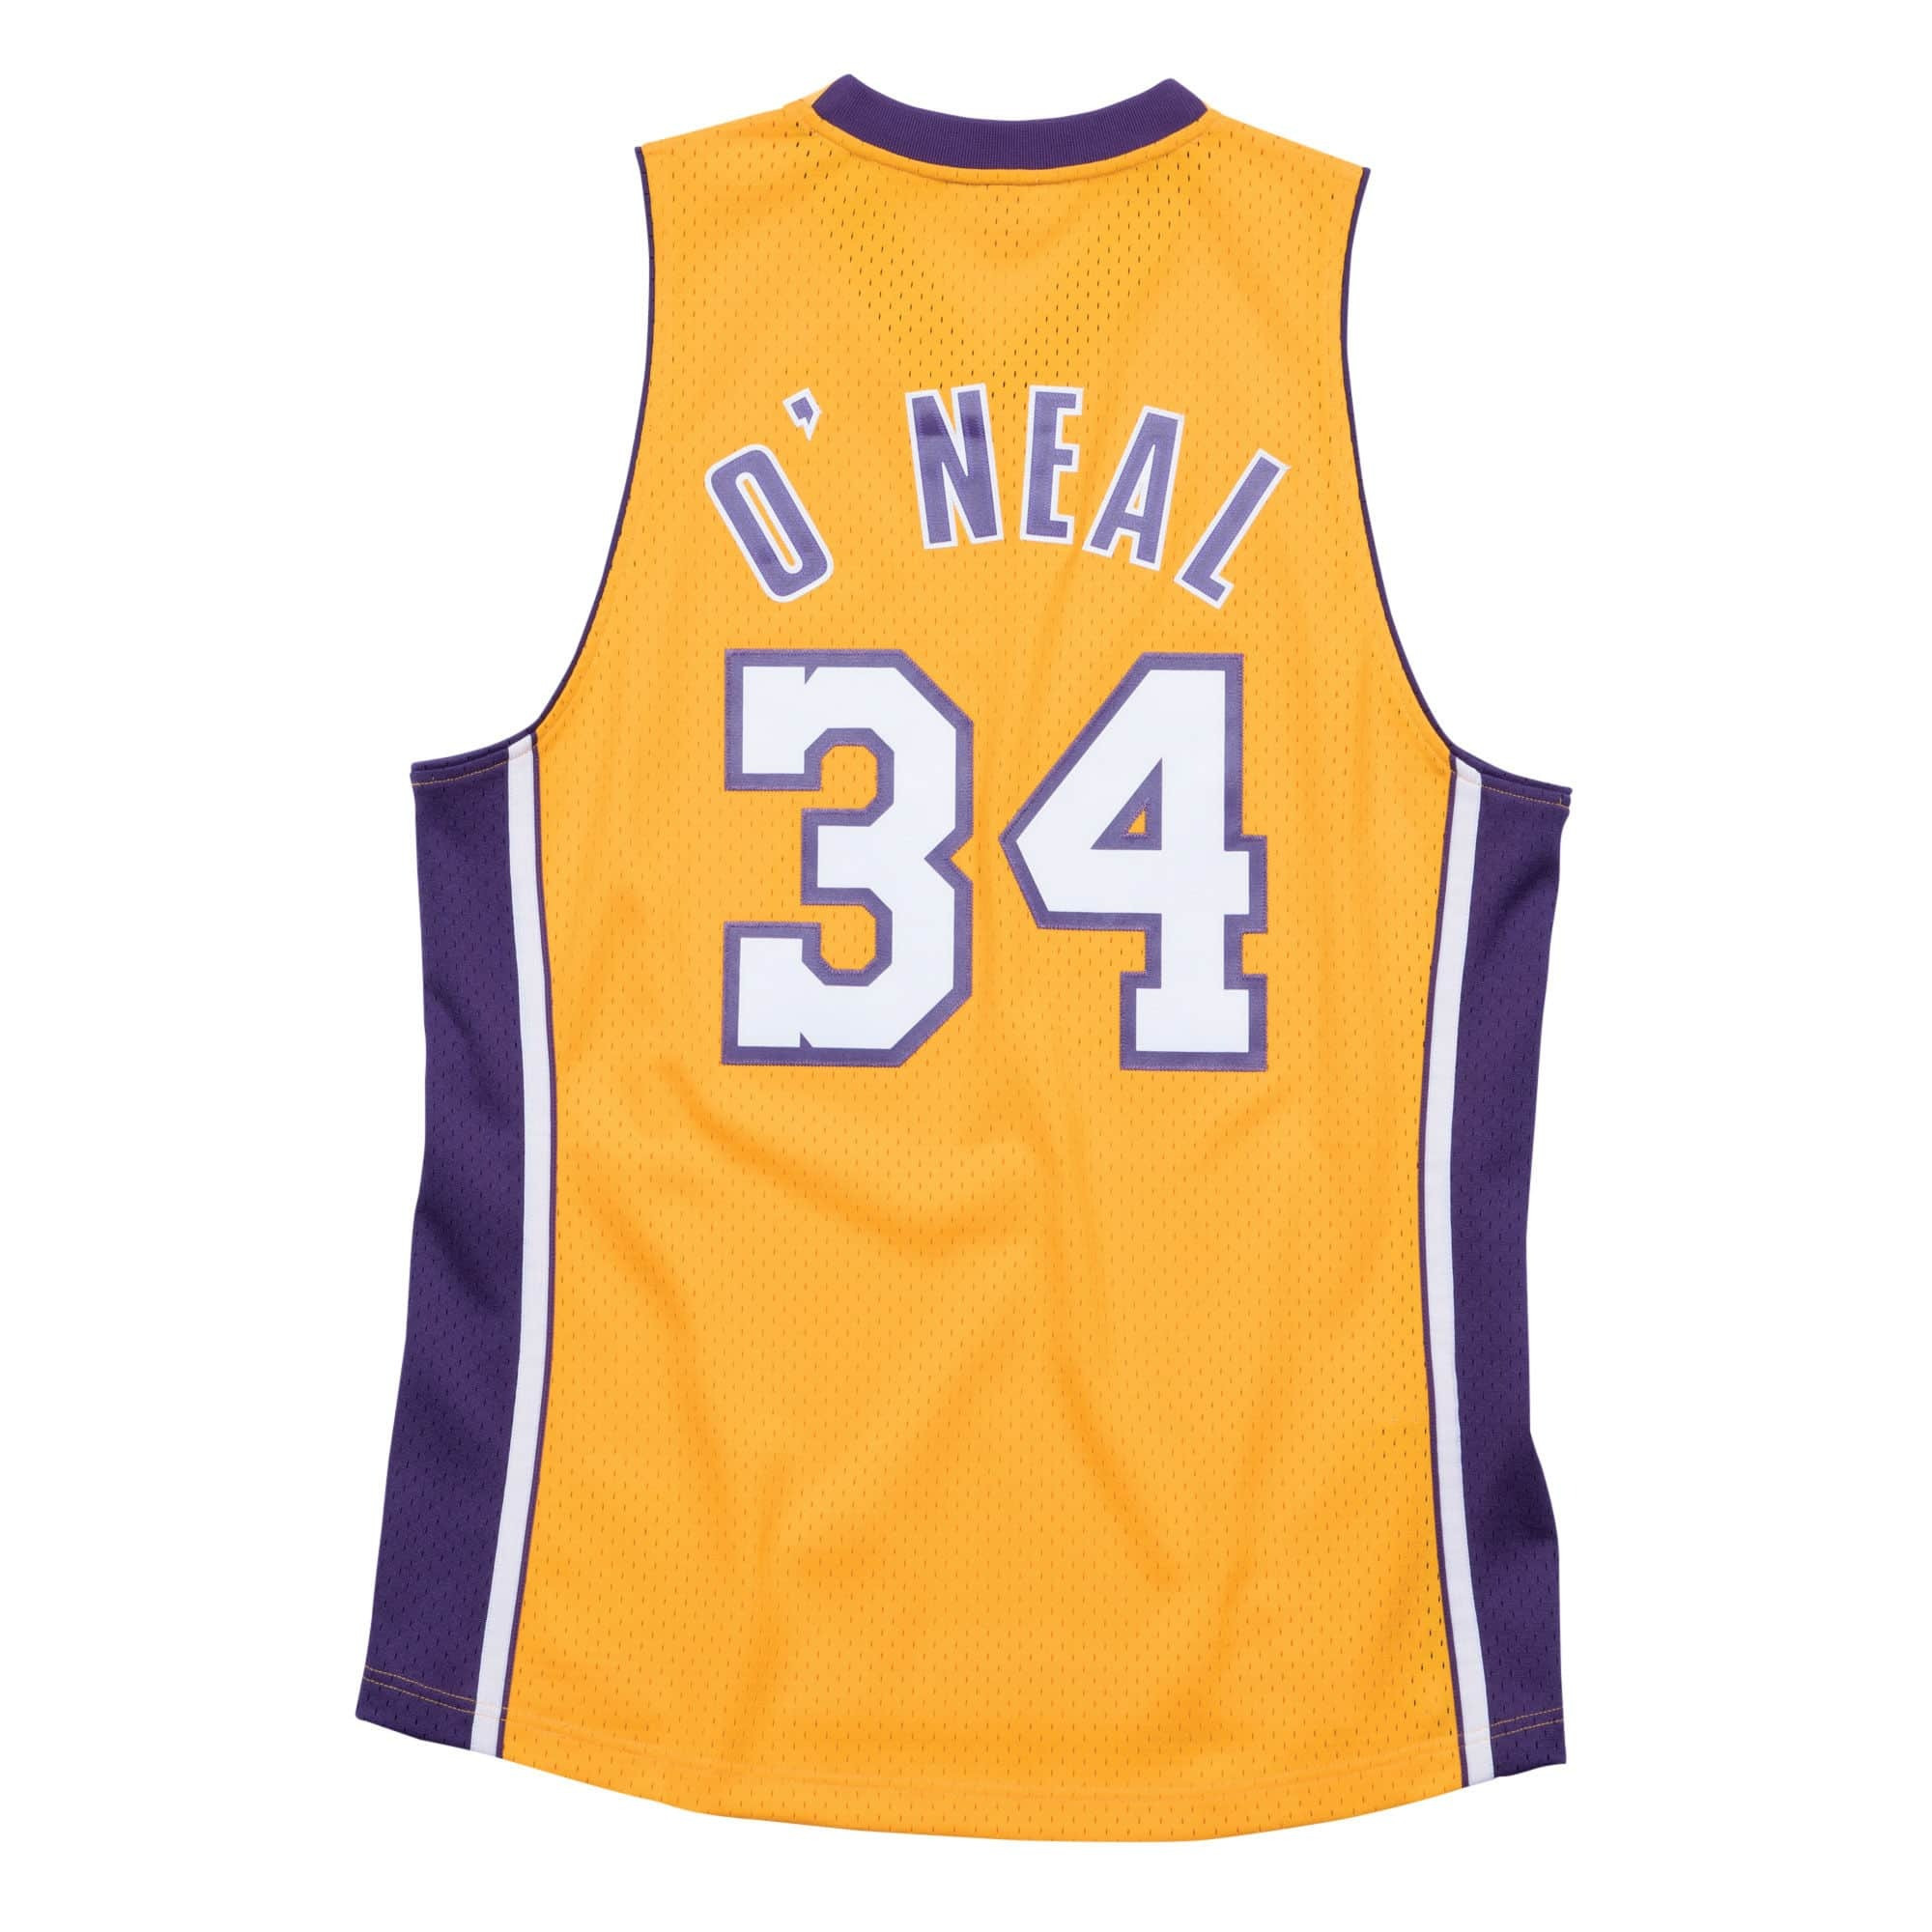 Mitchell & Ness NBA Los Angeles Lakers Shaquille O'Neal Swingman Jersey Home 1999-00 Basketball Jersey - Yellow - SMJYGS18179-SON